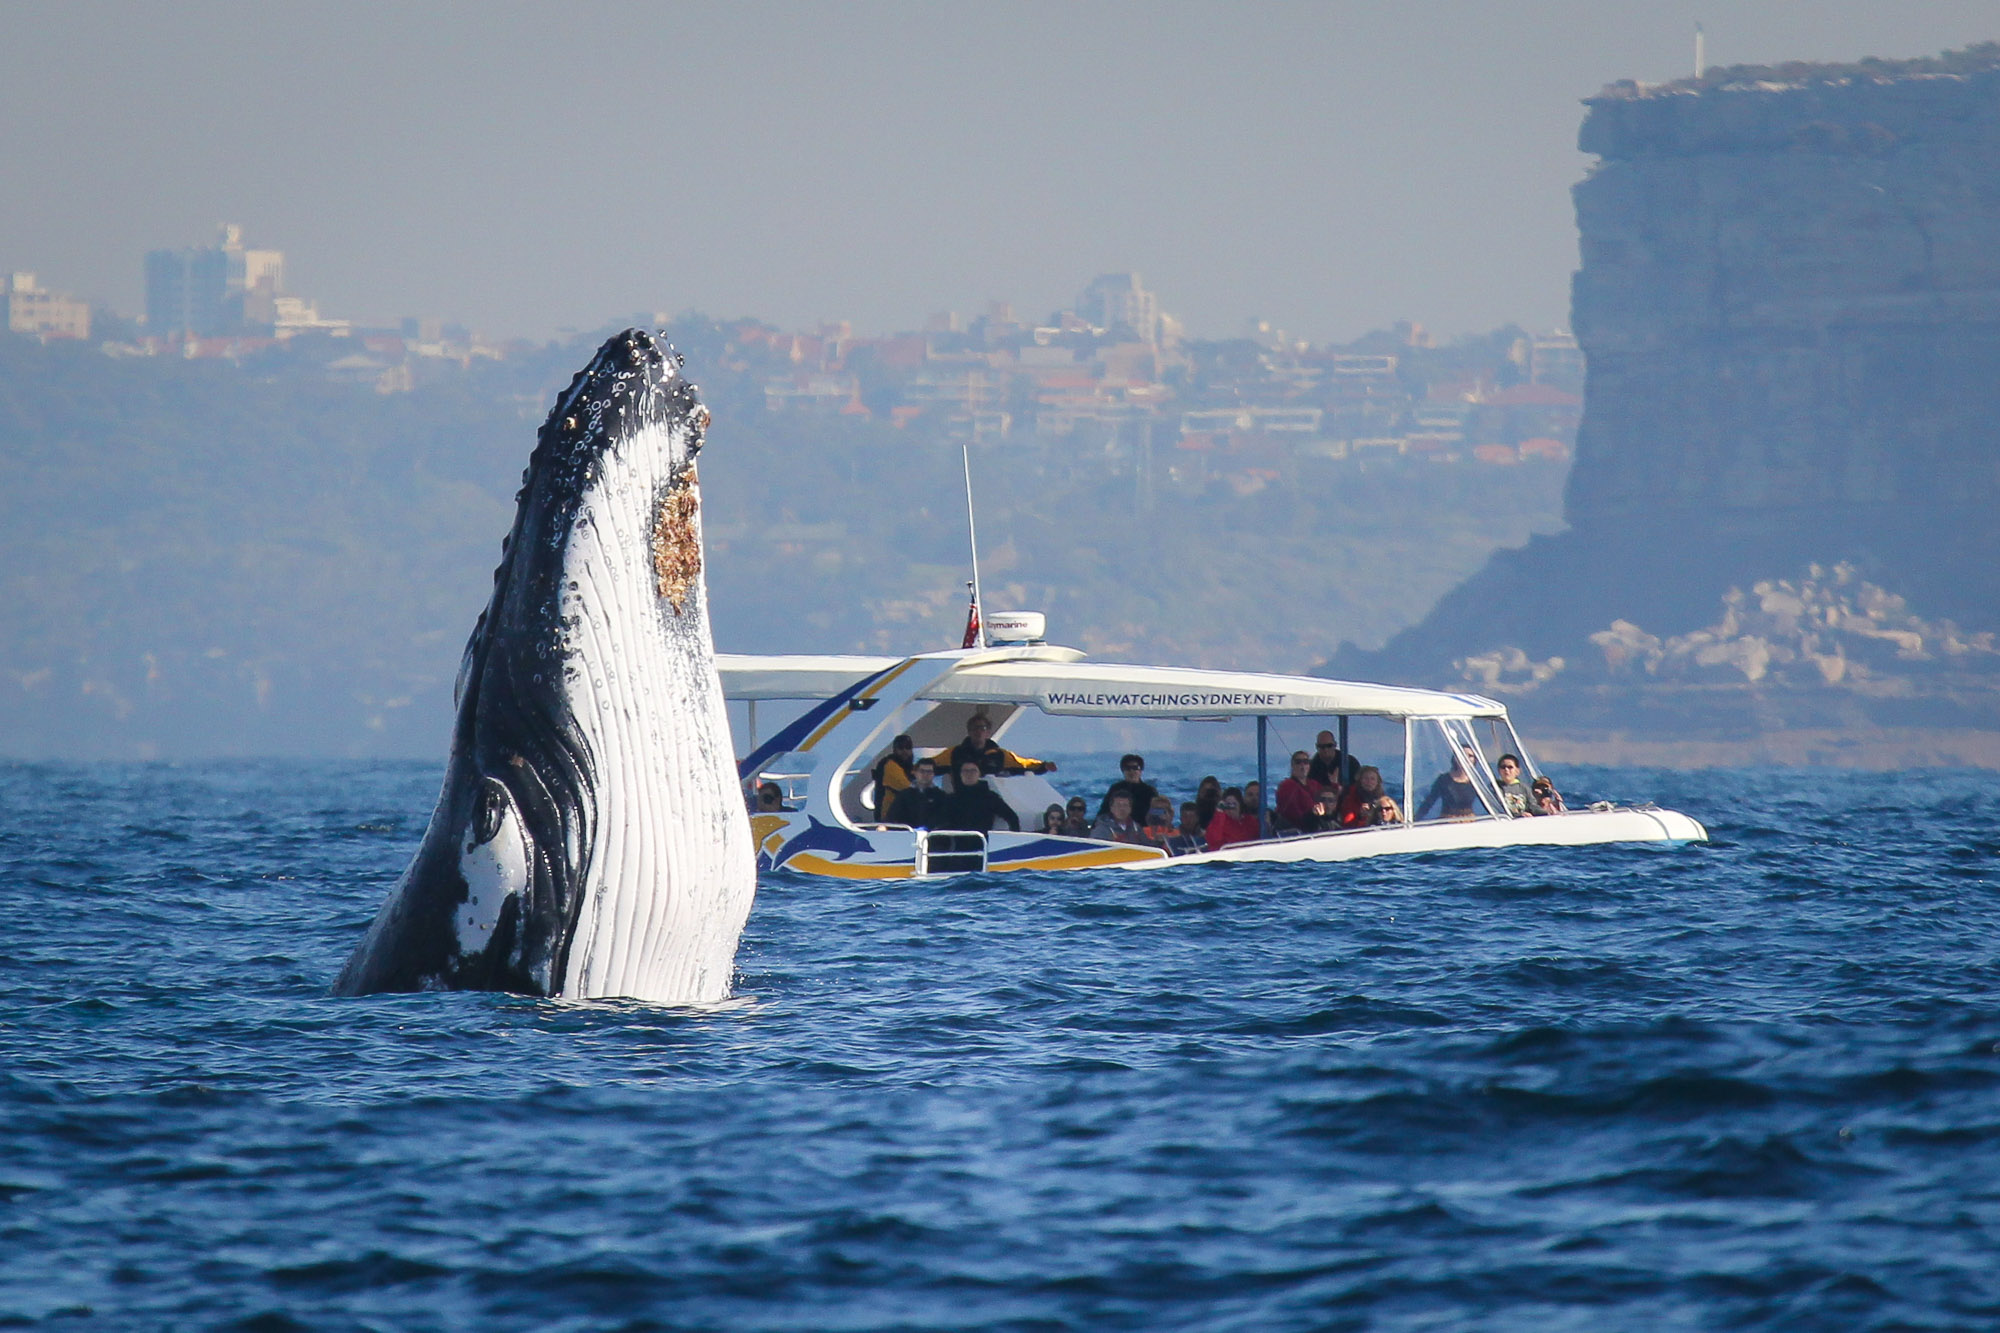 Best Whale Watching Cruise In Sydney - Whale Watching Sydney